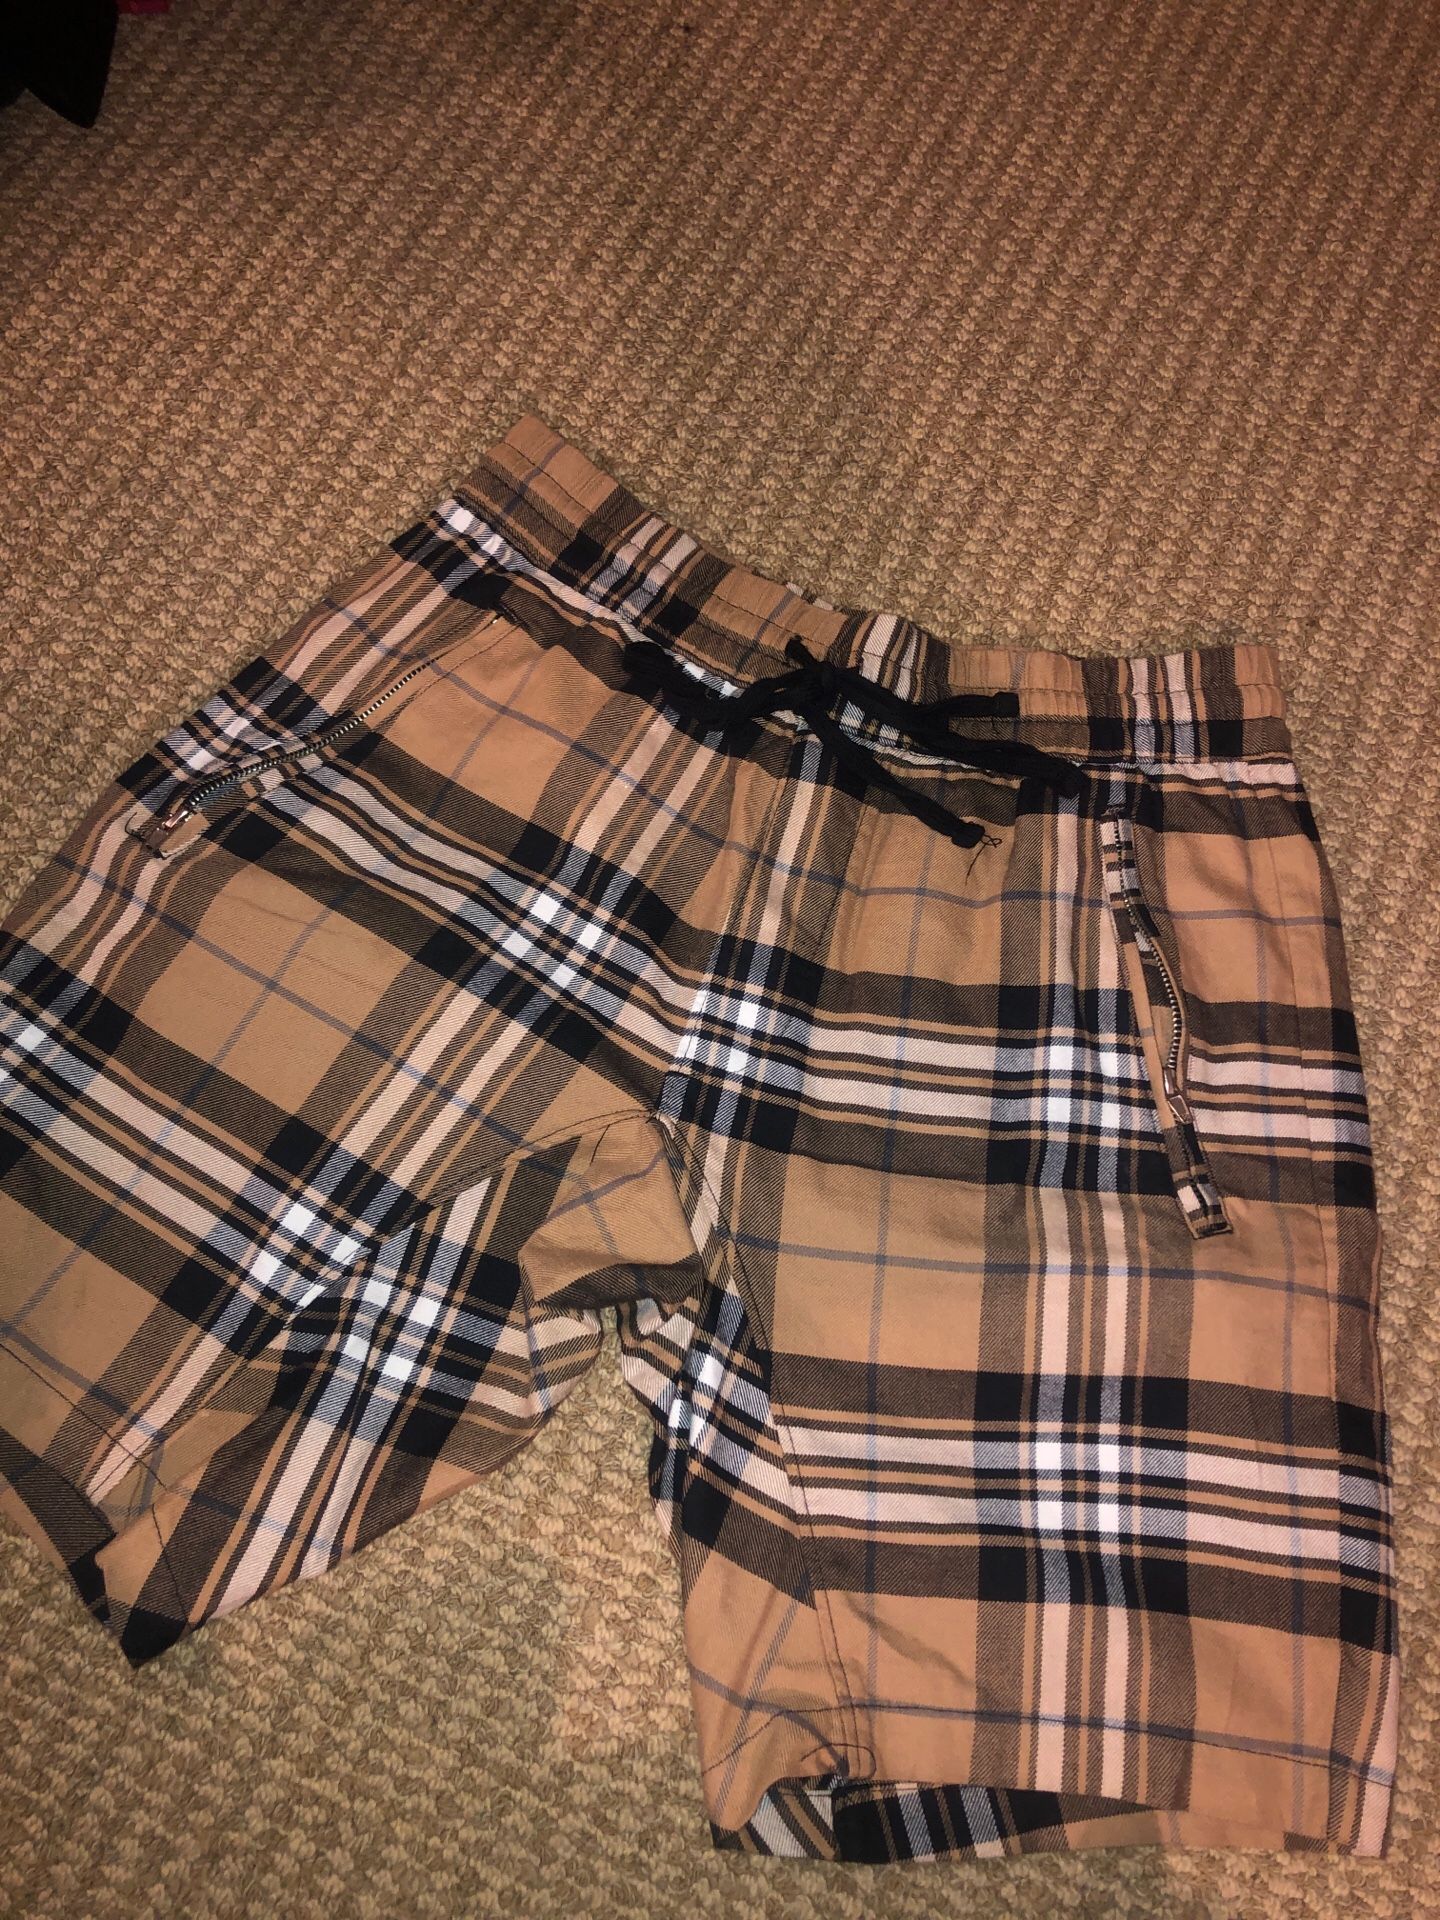 Pacsun Burberry Designer Style Shorts Size Small Elastic Zippers